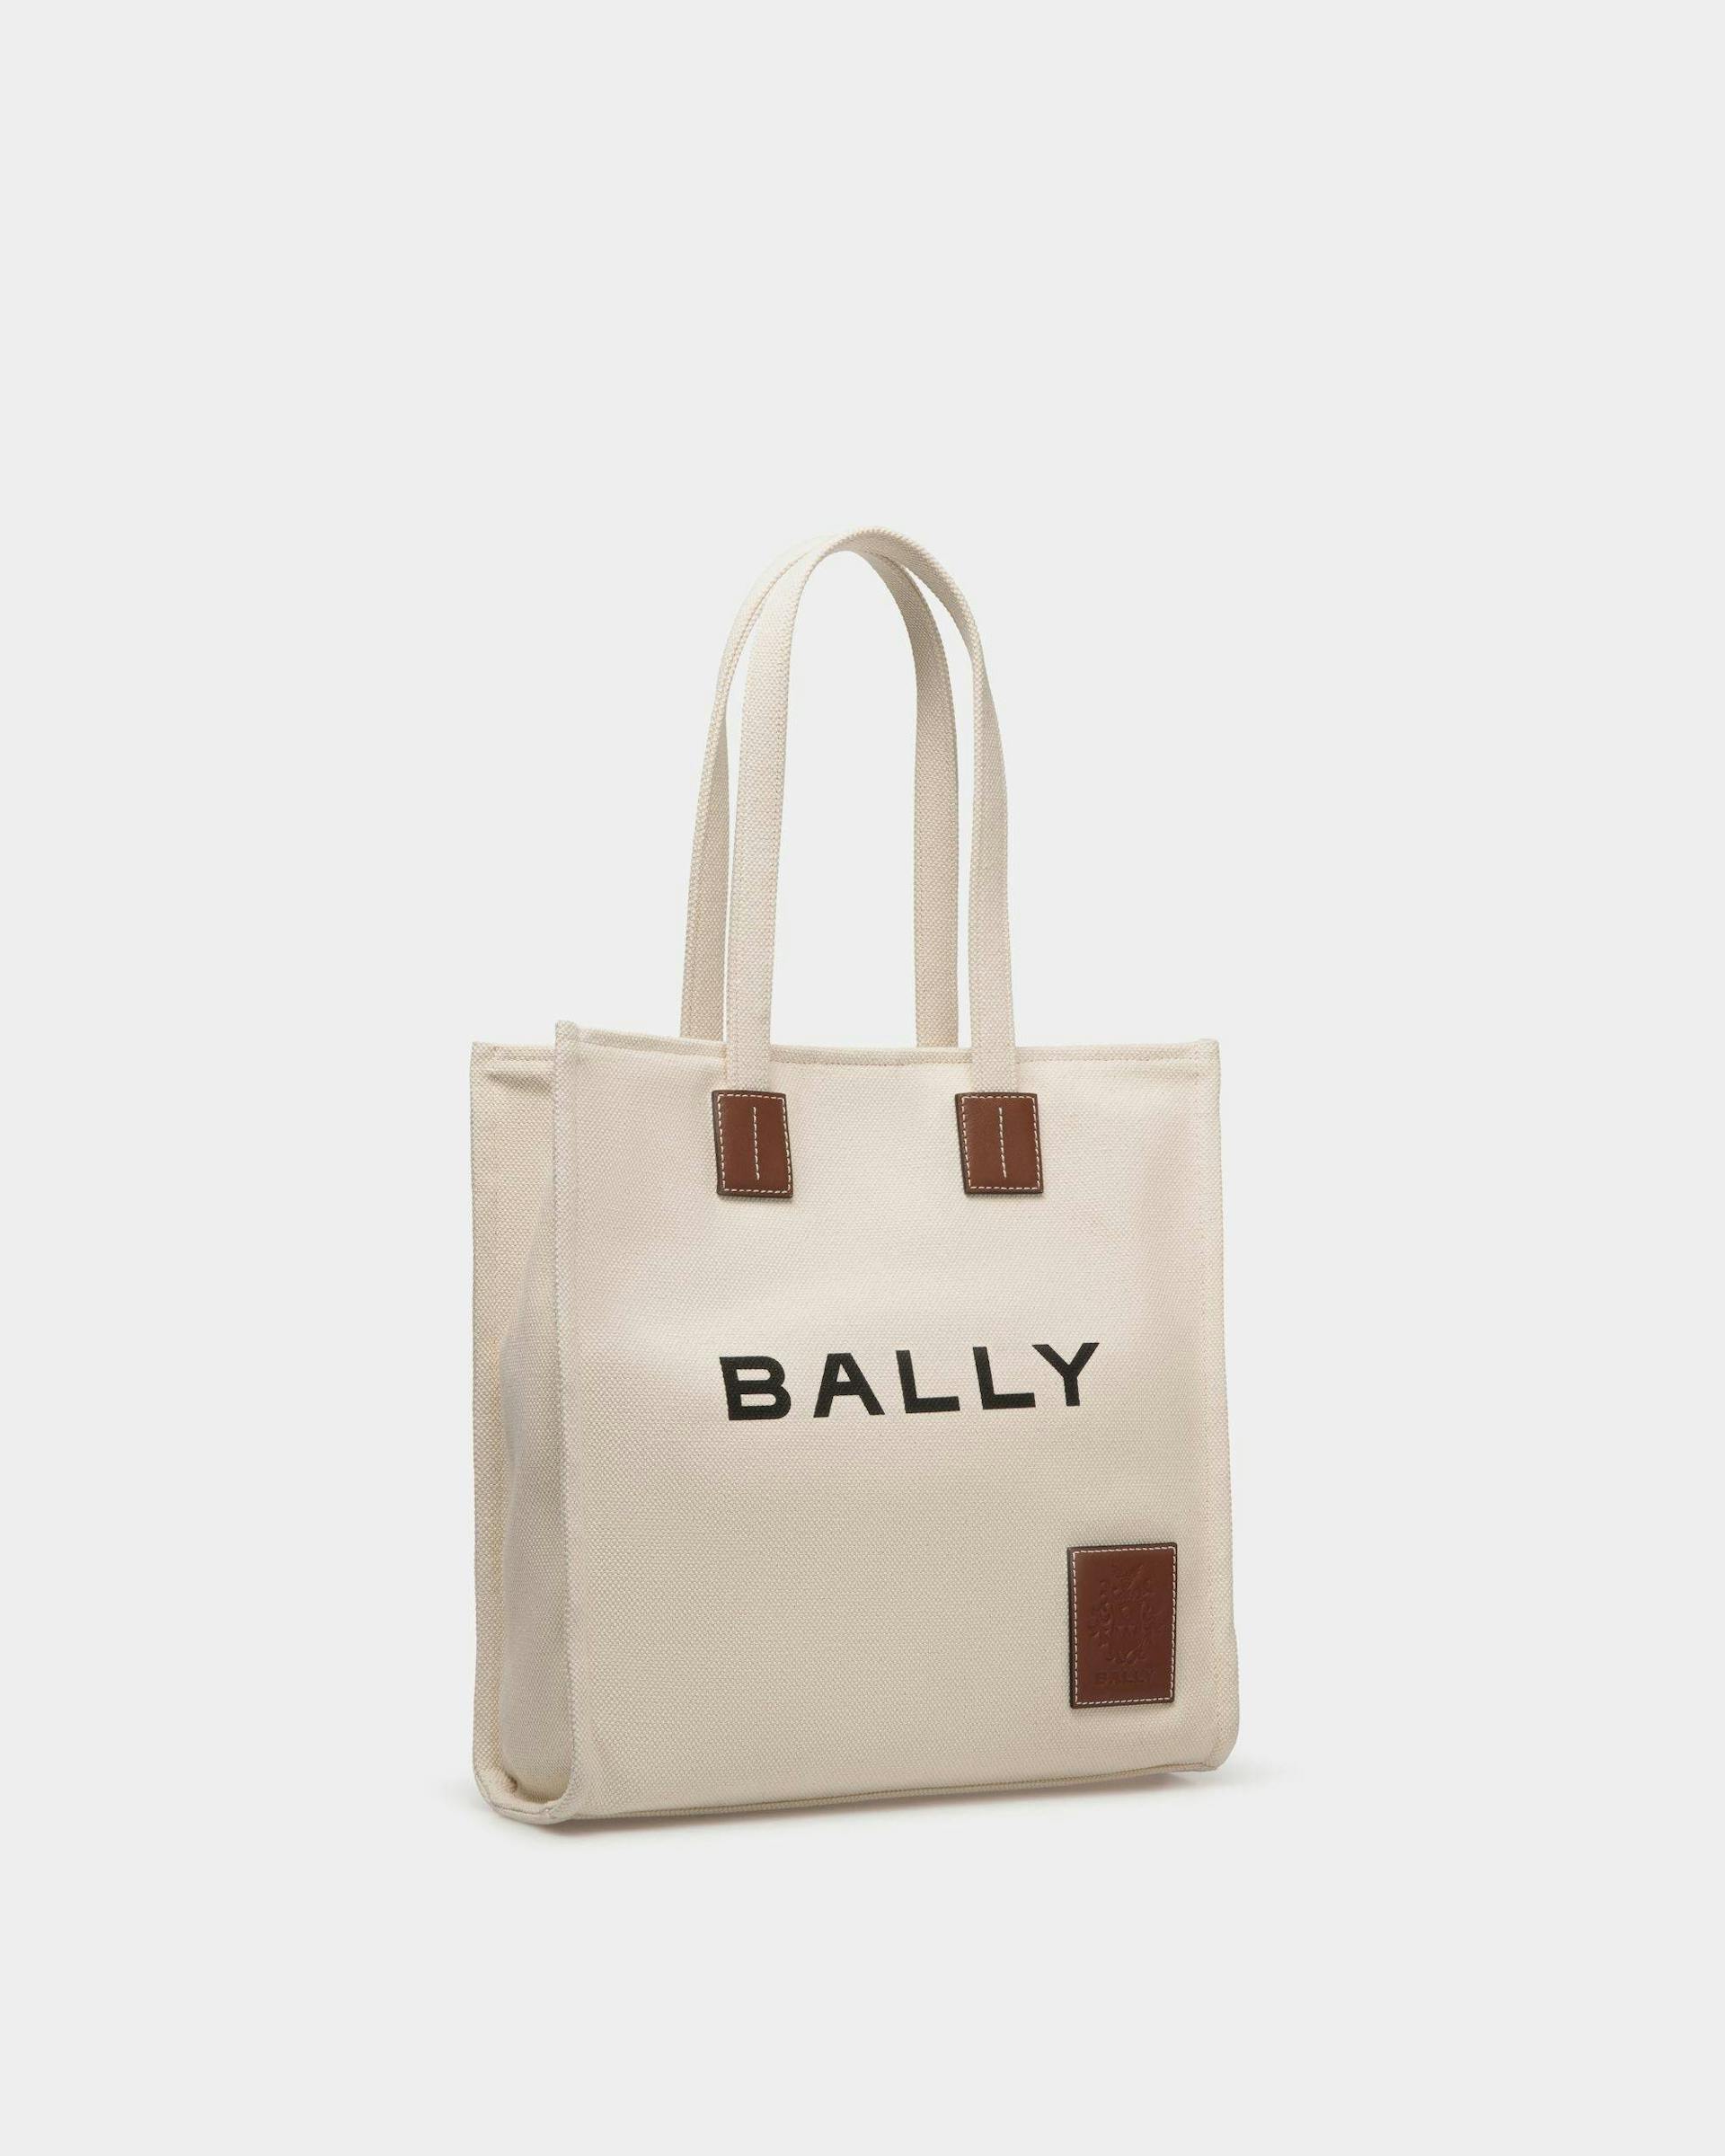 Women's Akelei Tote Bag in Canvas | Bally | Still Life 3/4 Front